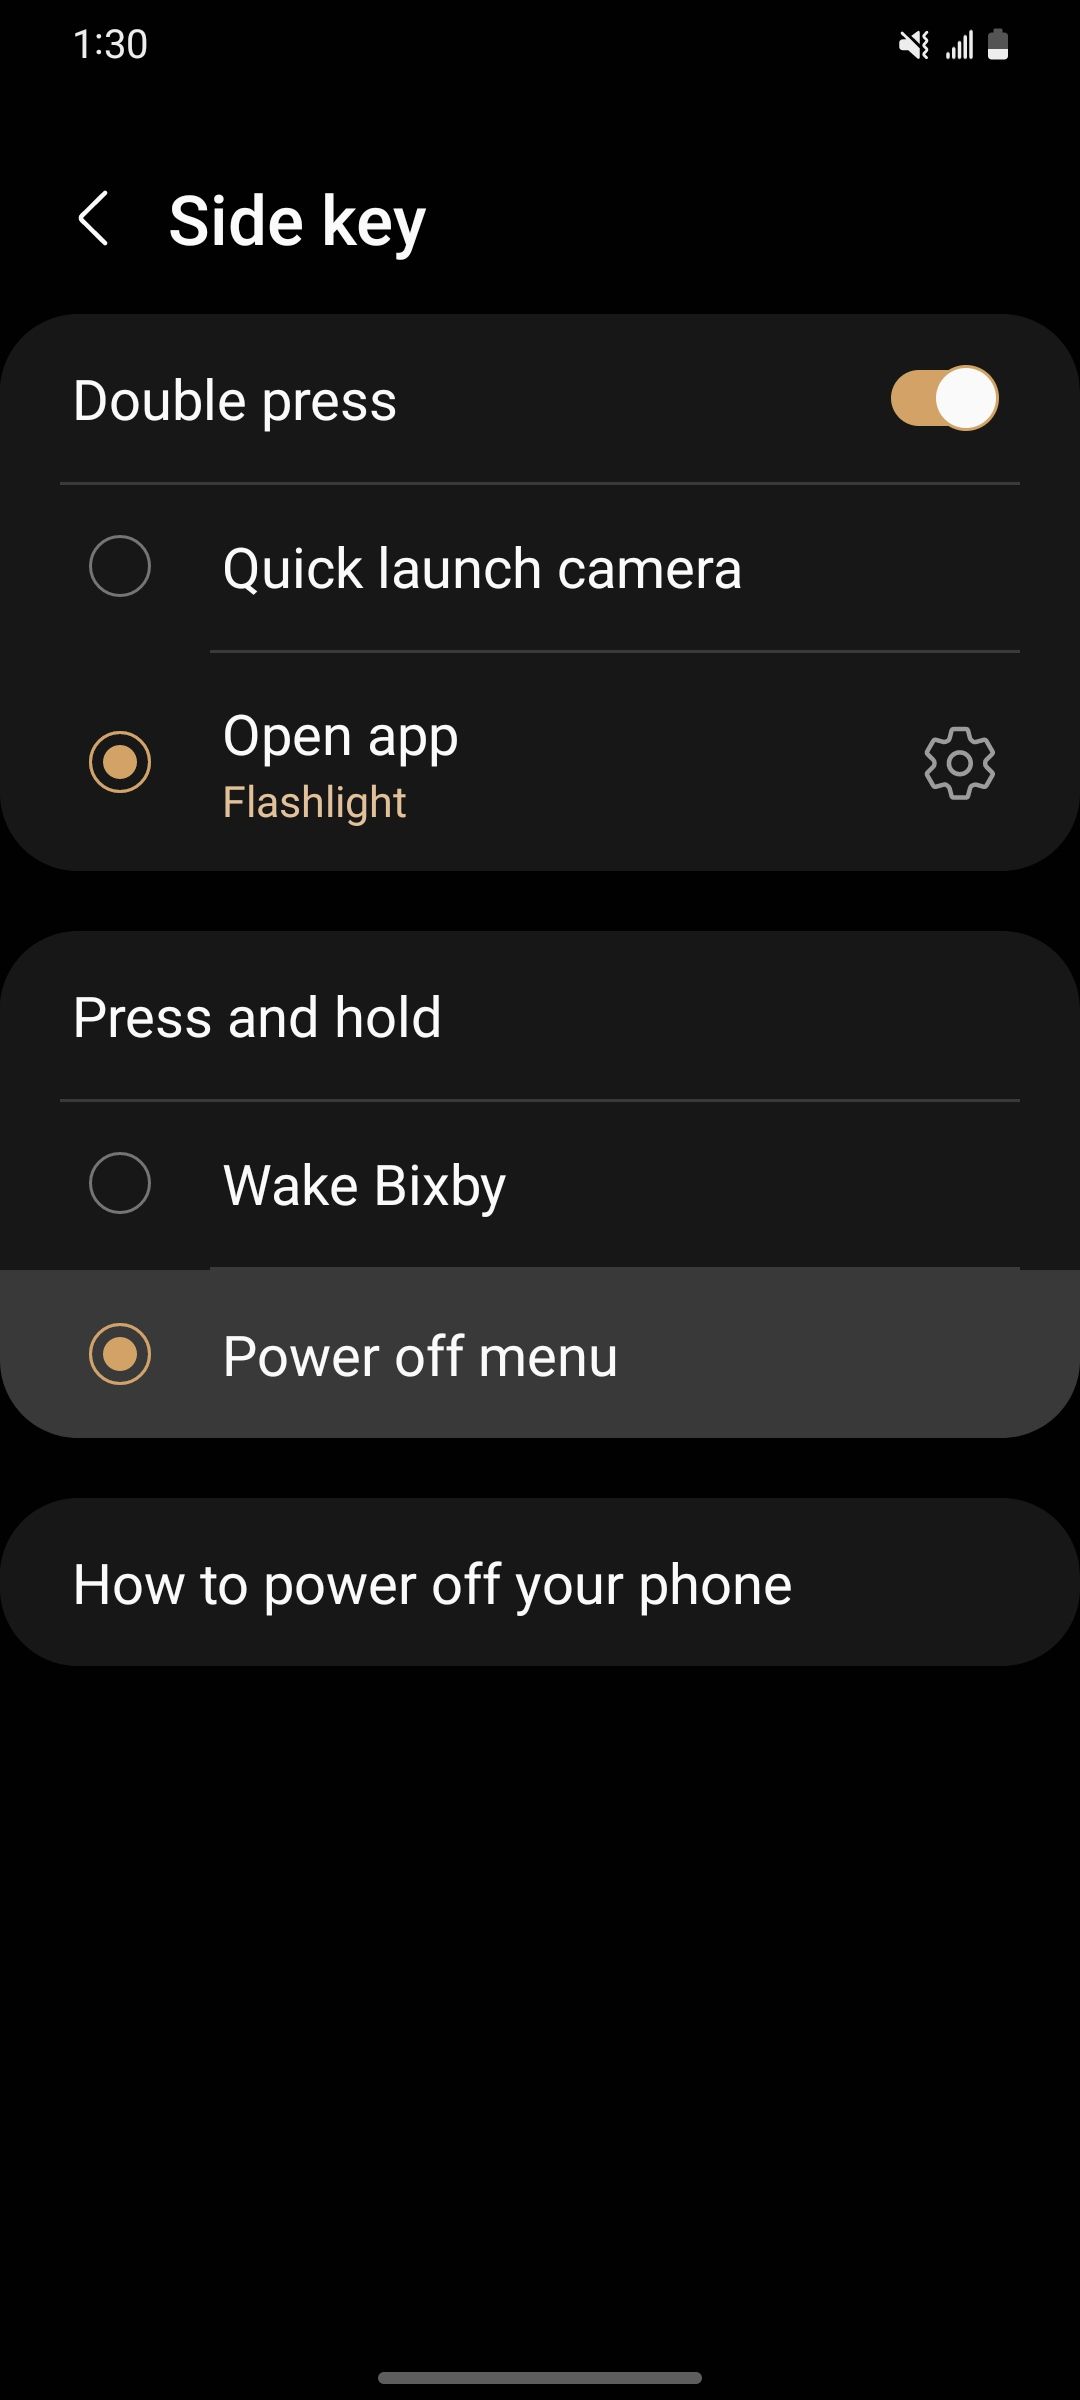 Disabling Bixby on a Samsung Galaxy phone by selecting the Power off menu setting